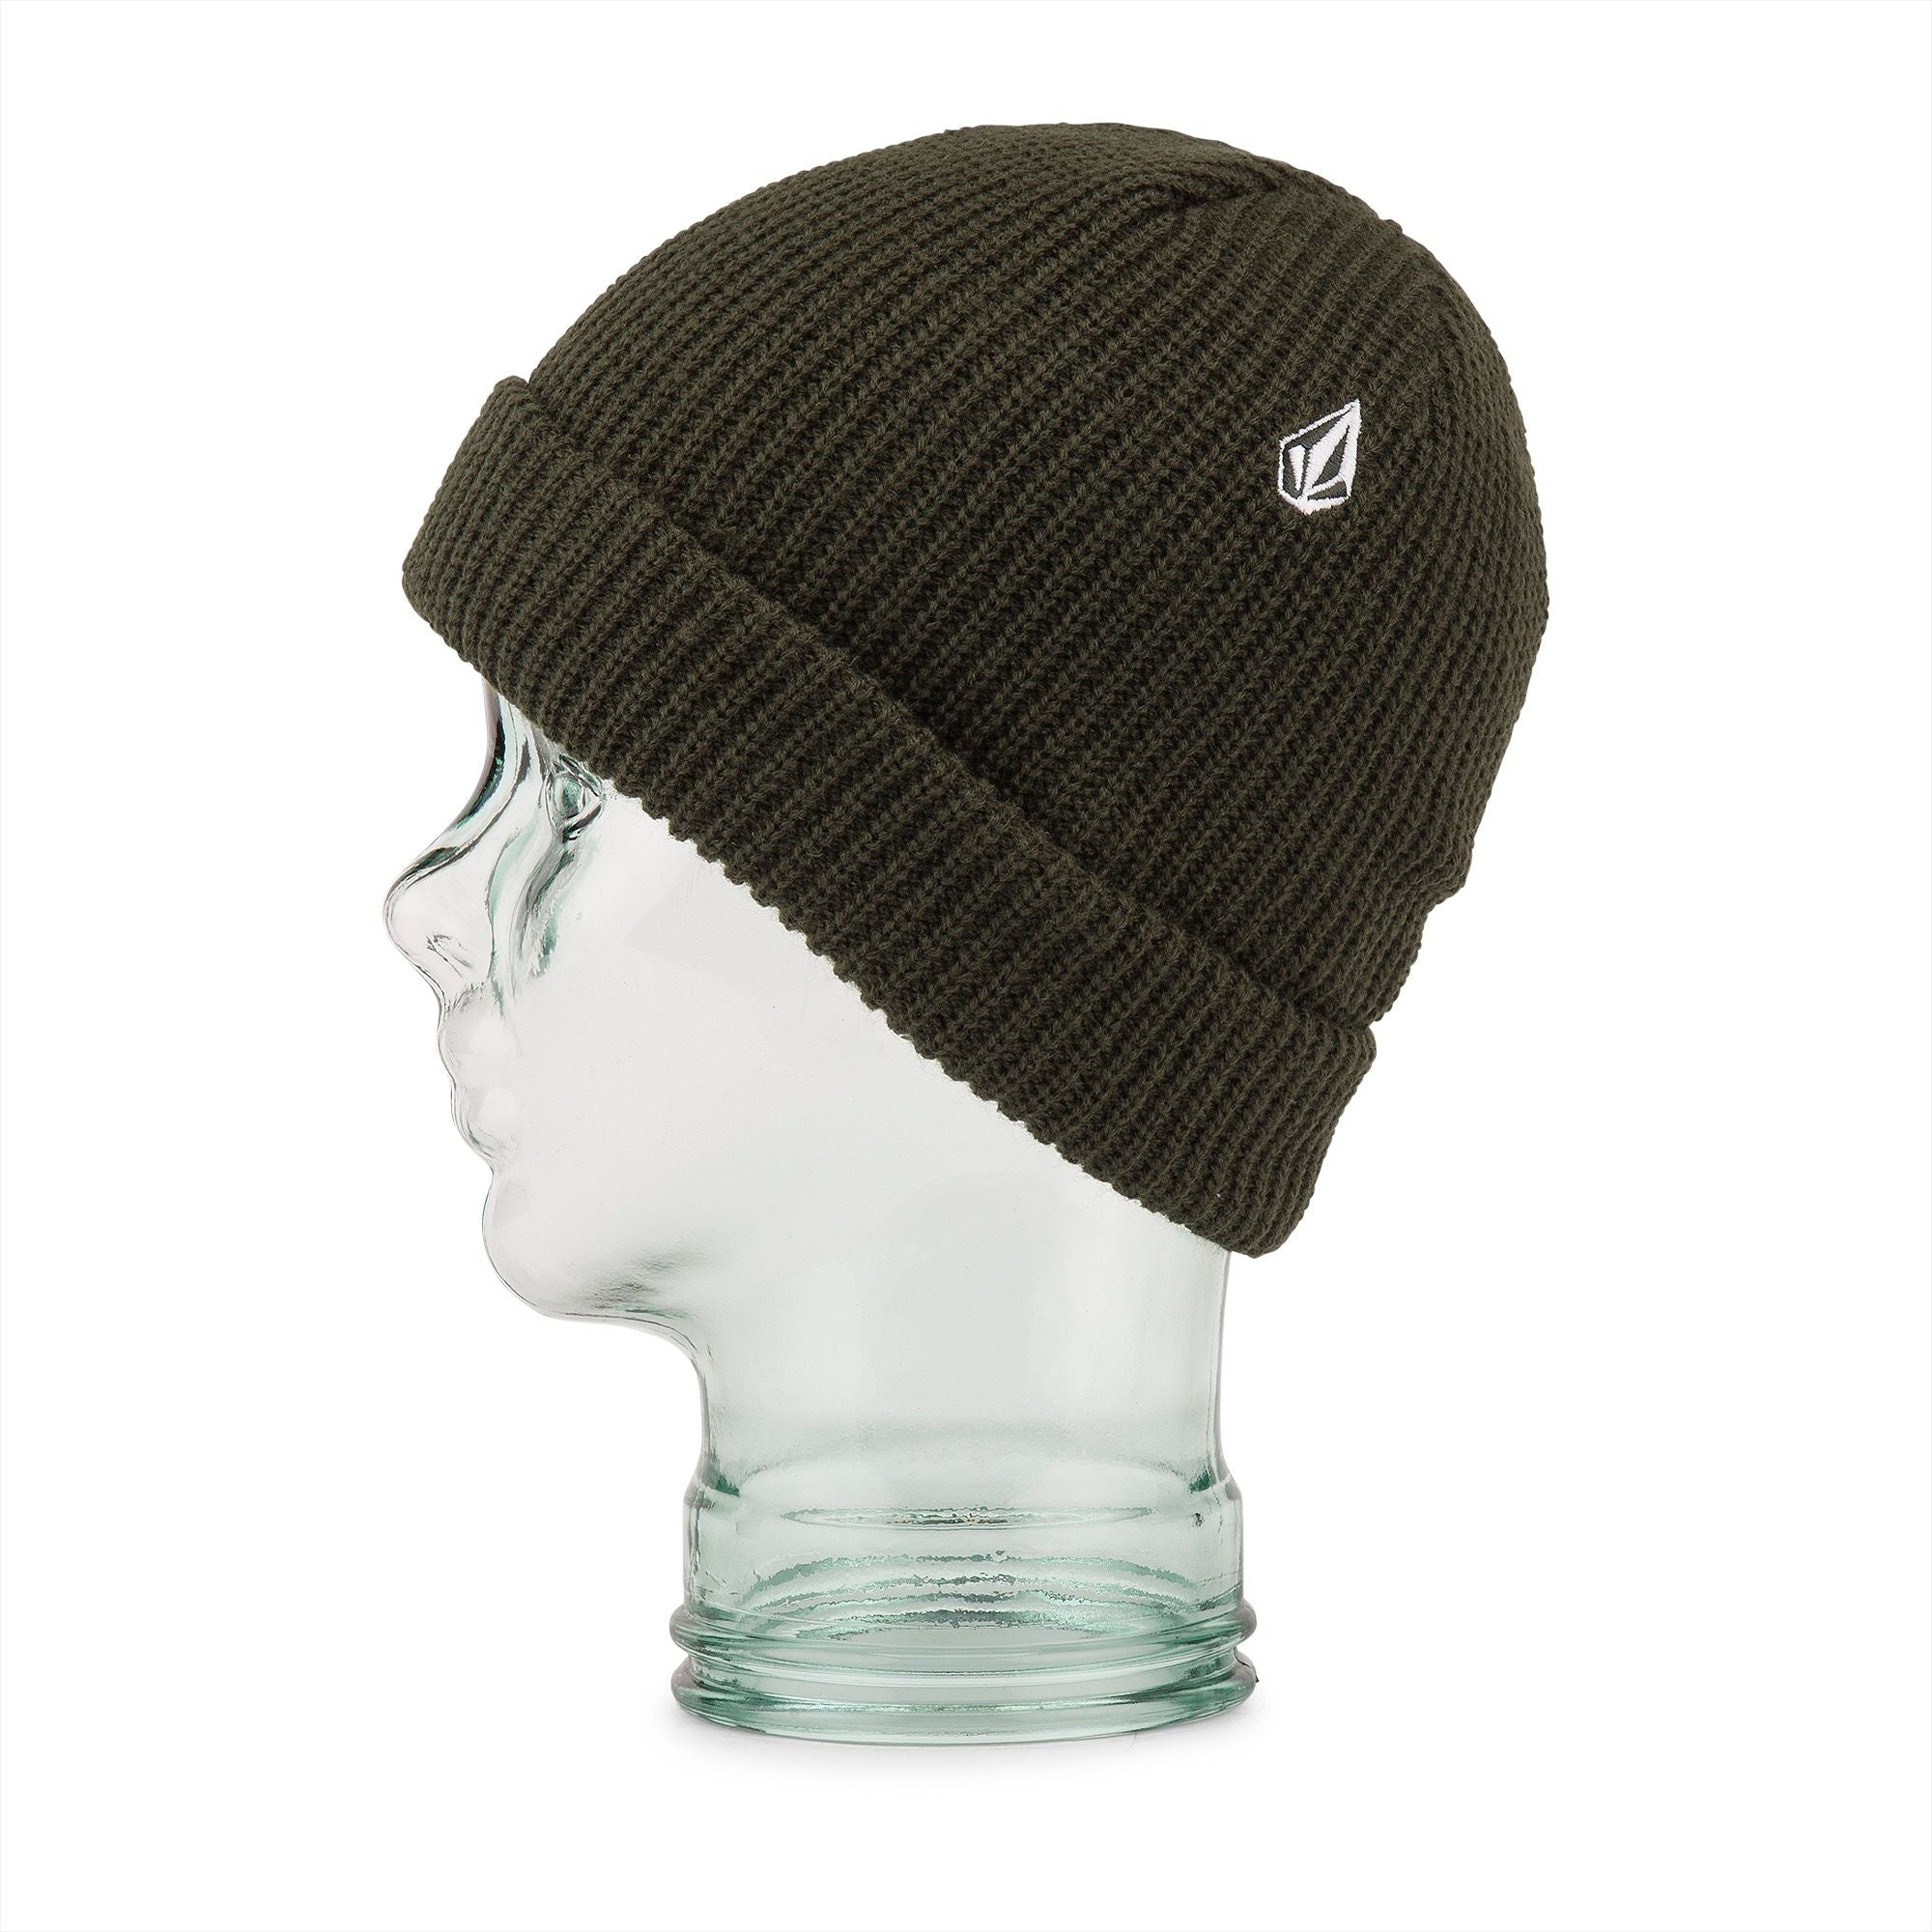 Saturated Green Sweep Volcom Beanie